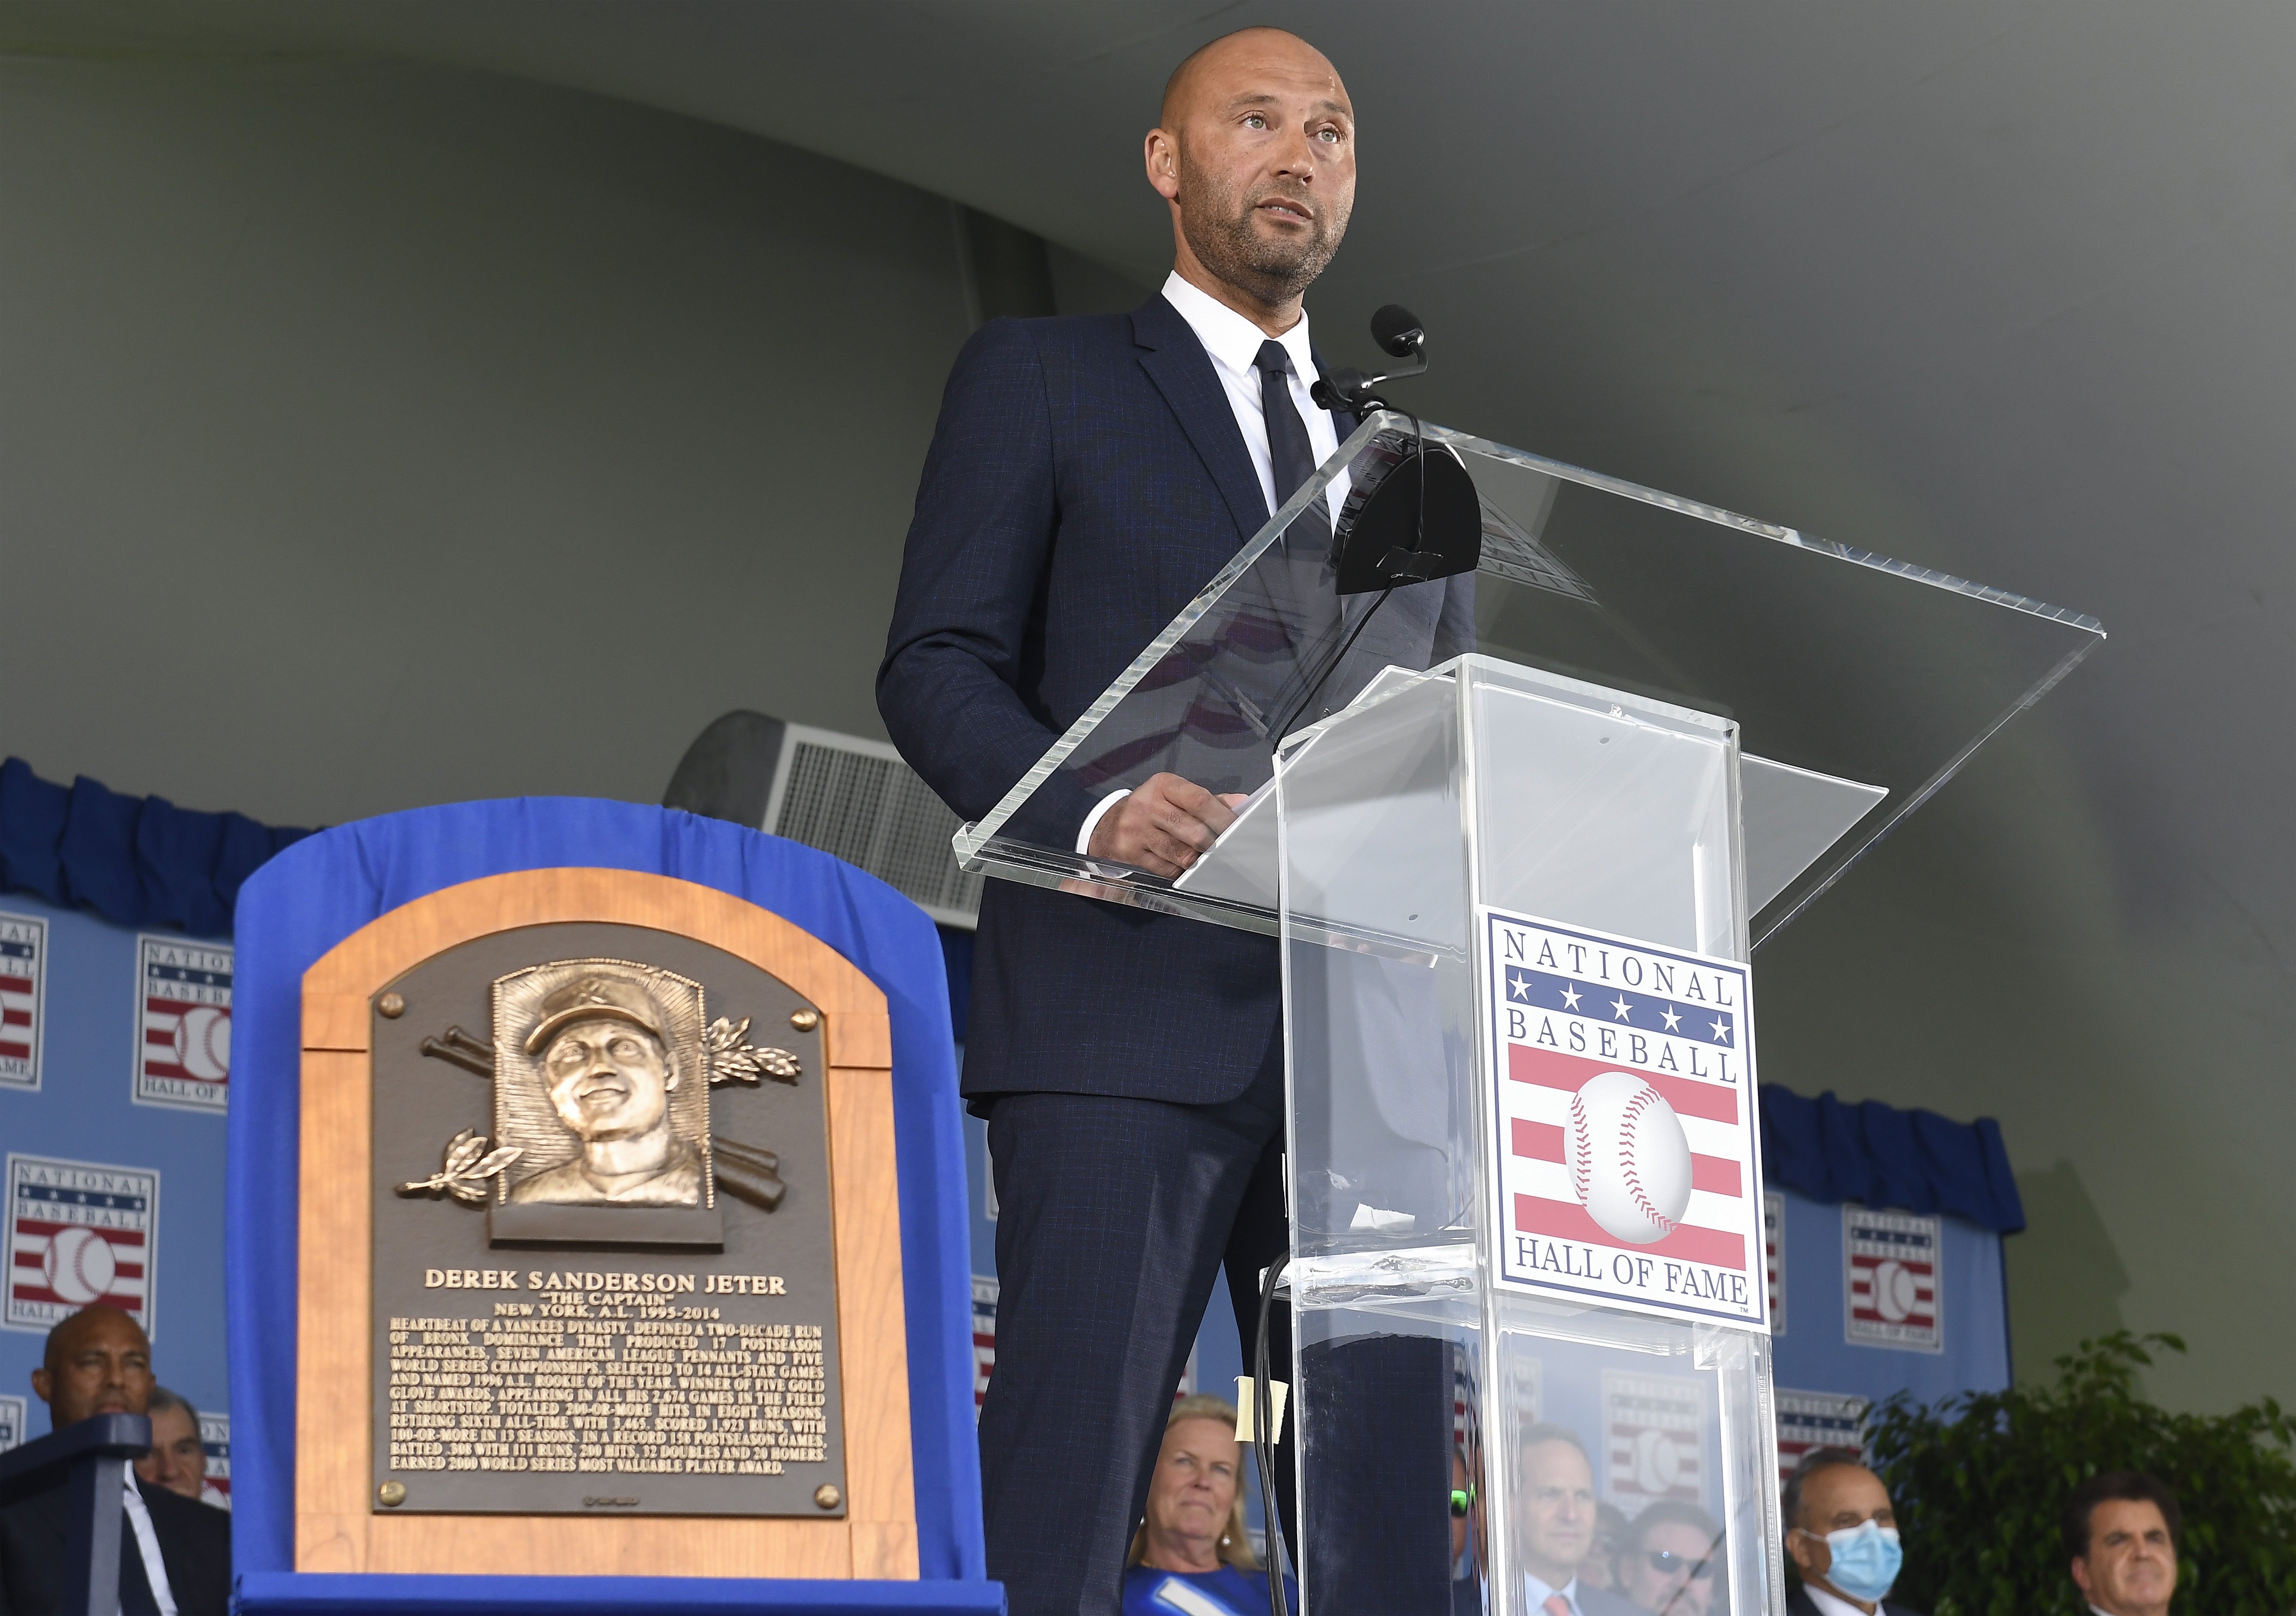 'The Captain' live stream (7/18): How to watch Derek Jeter documentary  online, TV, time 